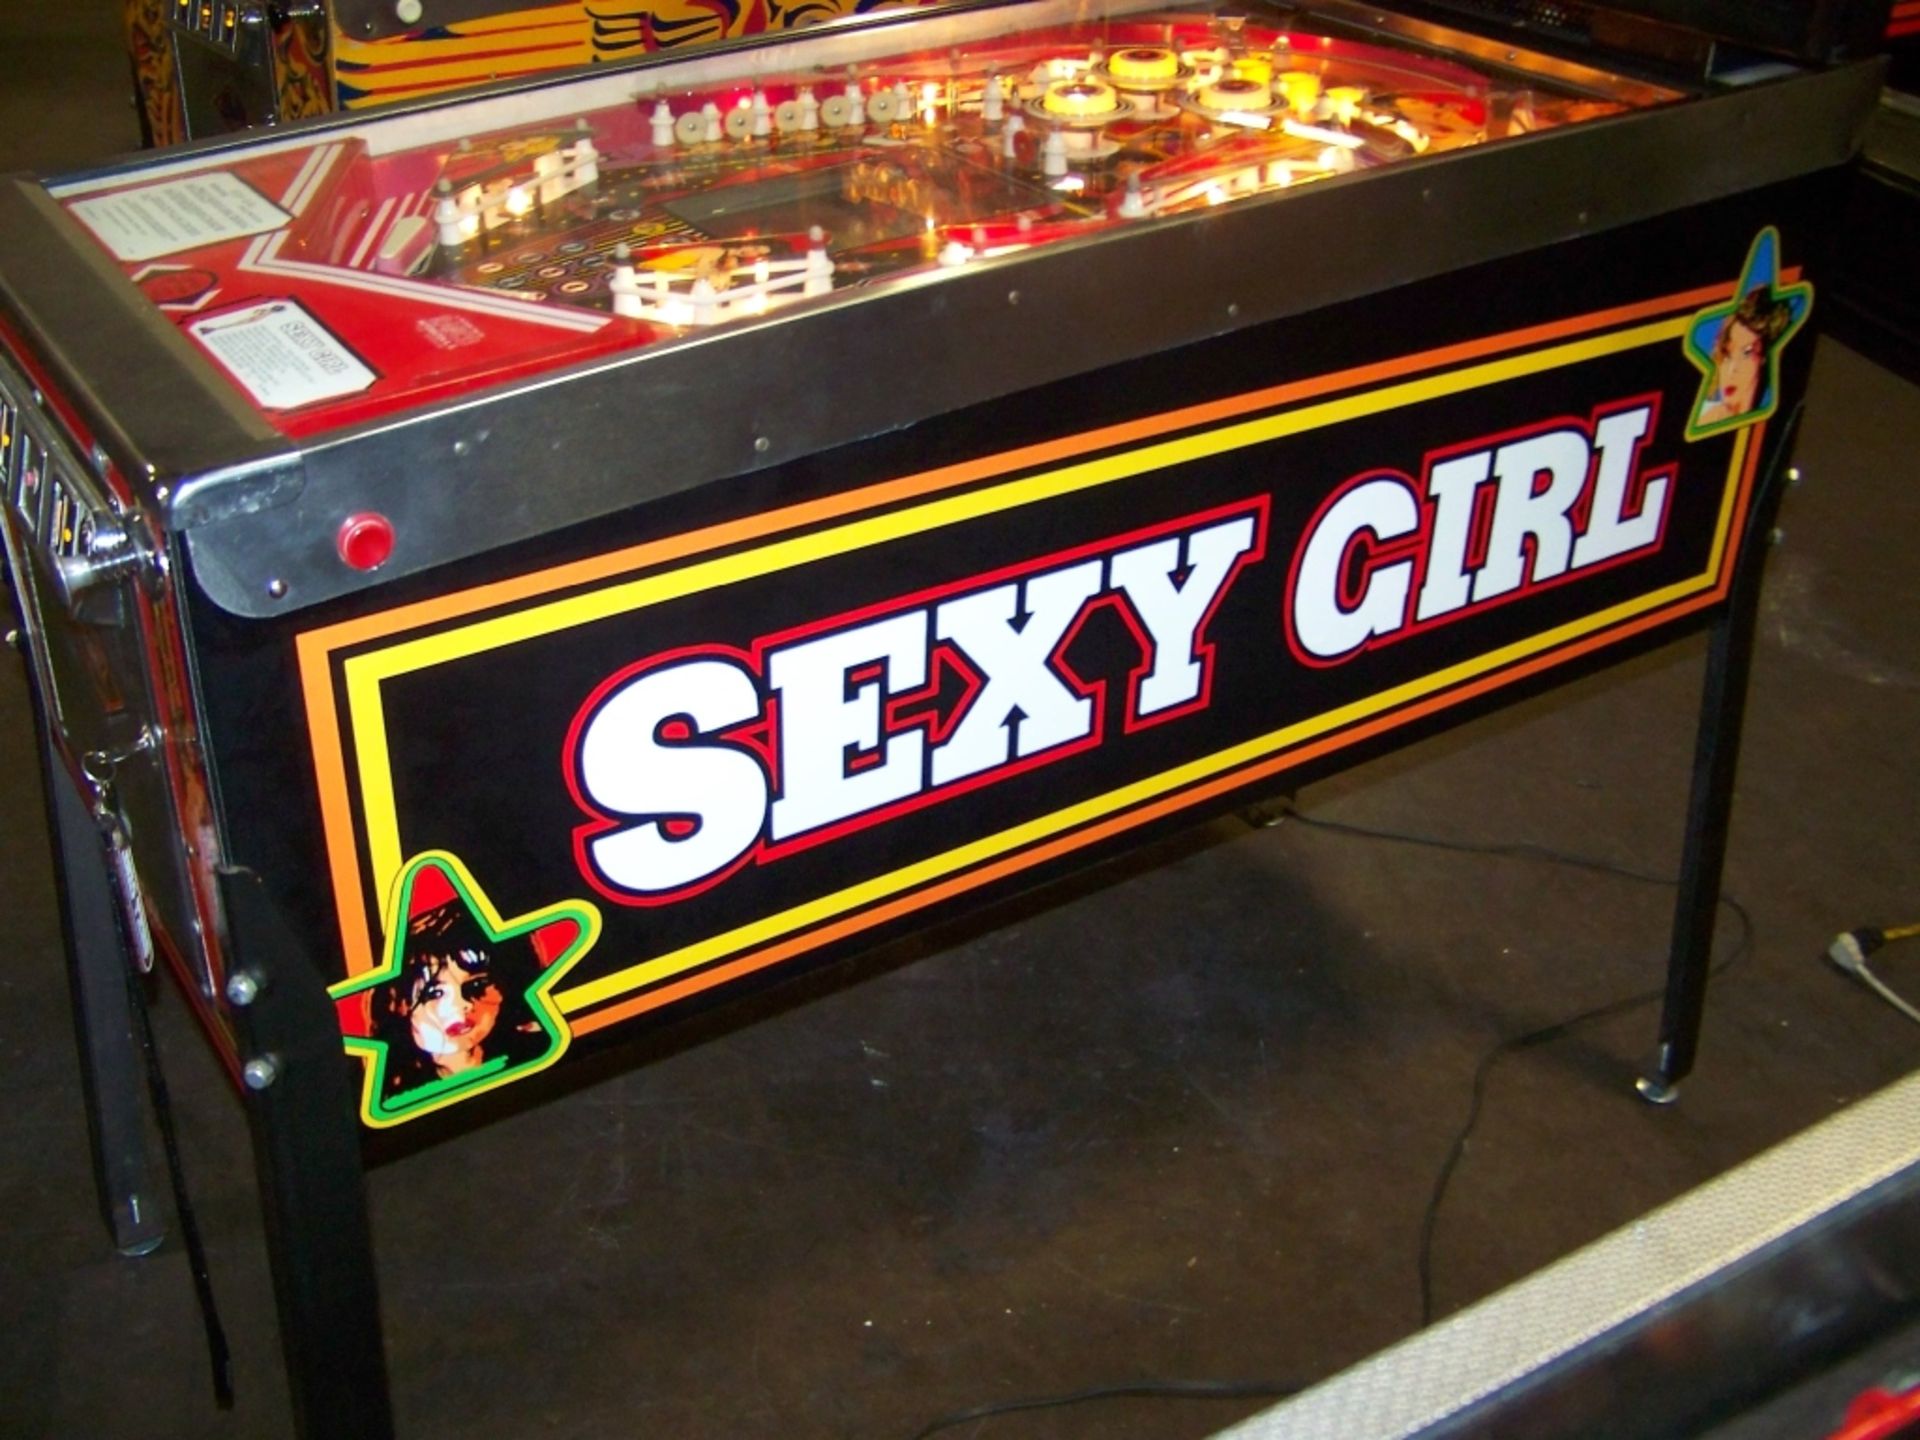 SEXY GIRL PINBALL MACHINE 1980 RANCO AUTOMATEN Item is in used condition. Evidence of wear and - Image 10 of 10